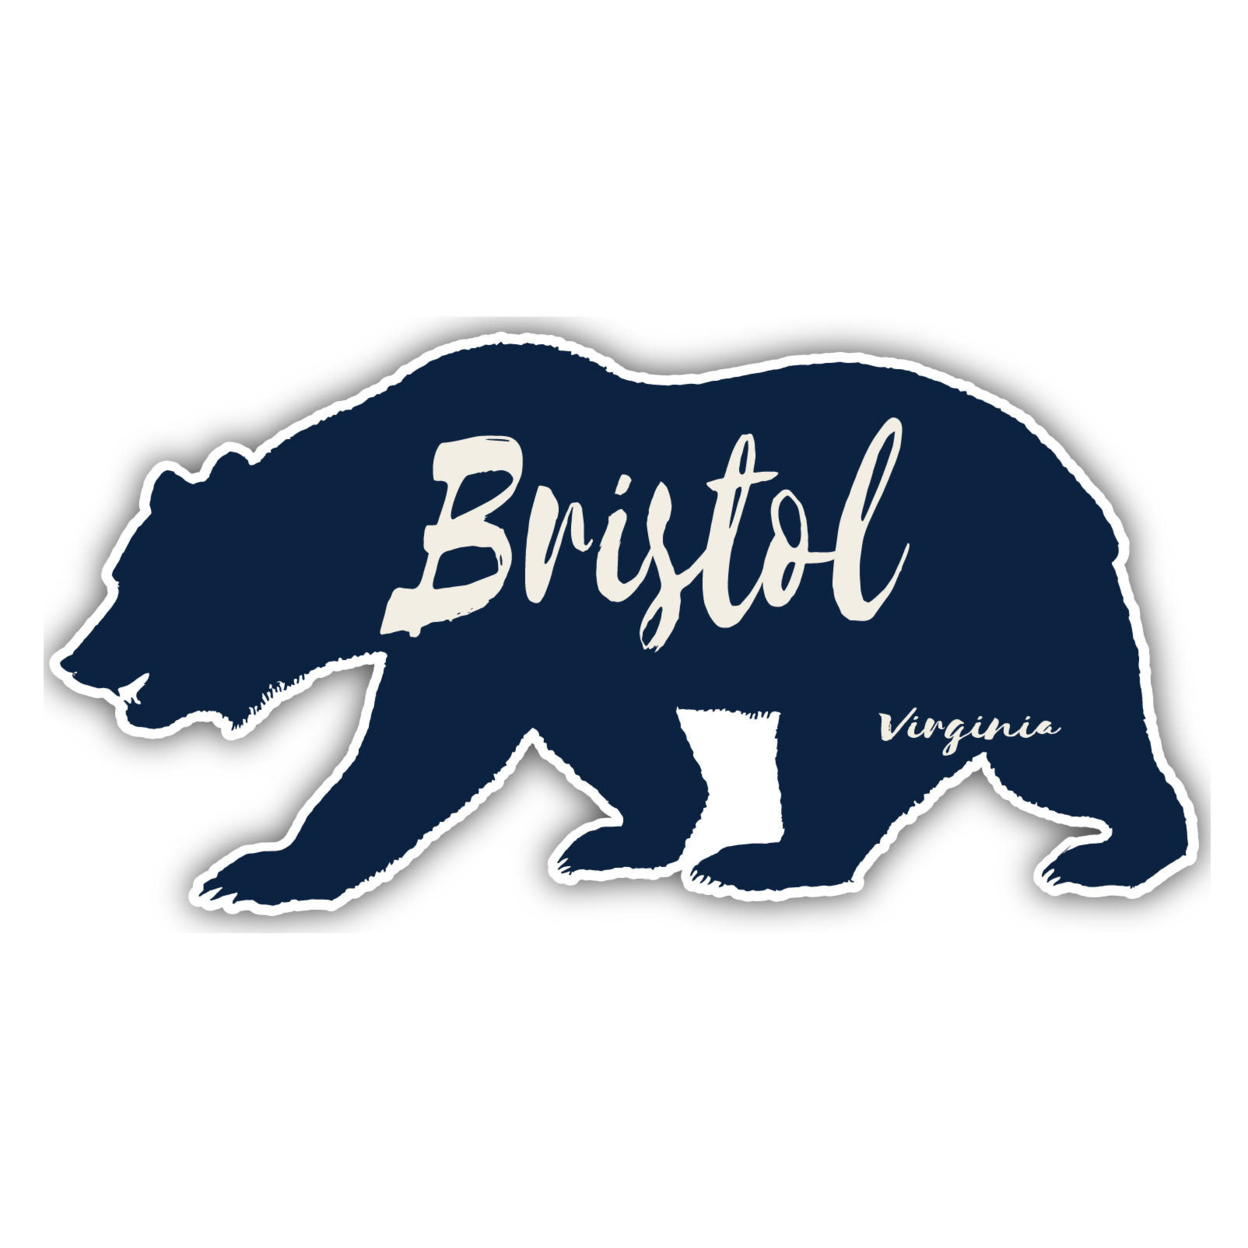 Bristol Virginia Souvenir Decorative Stickers (Choose Theme And Size) - 4-Pack, 10-Inch, Great Outdoors